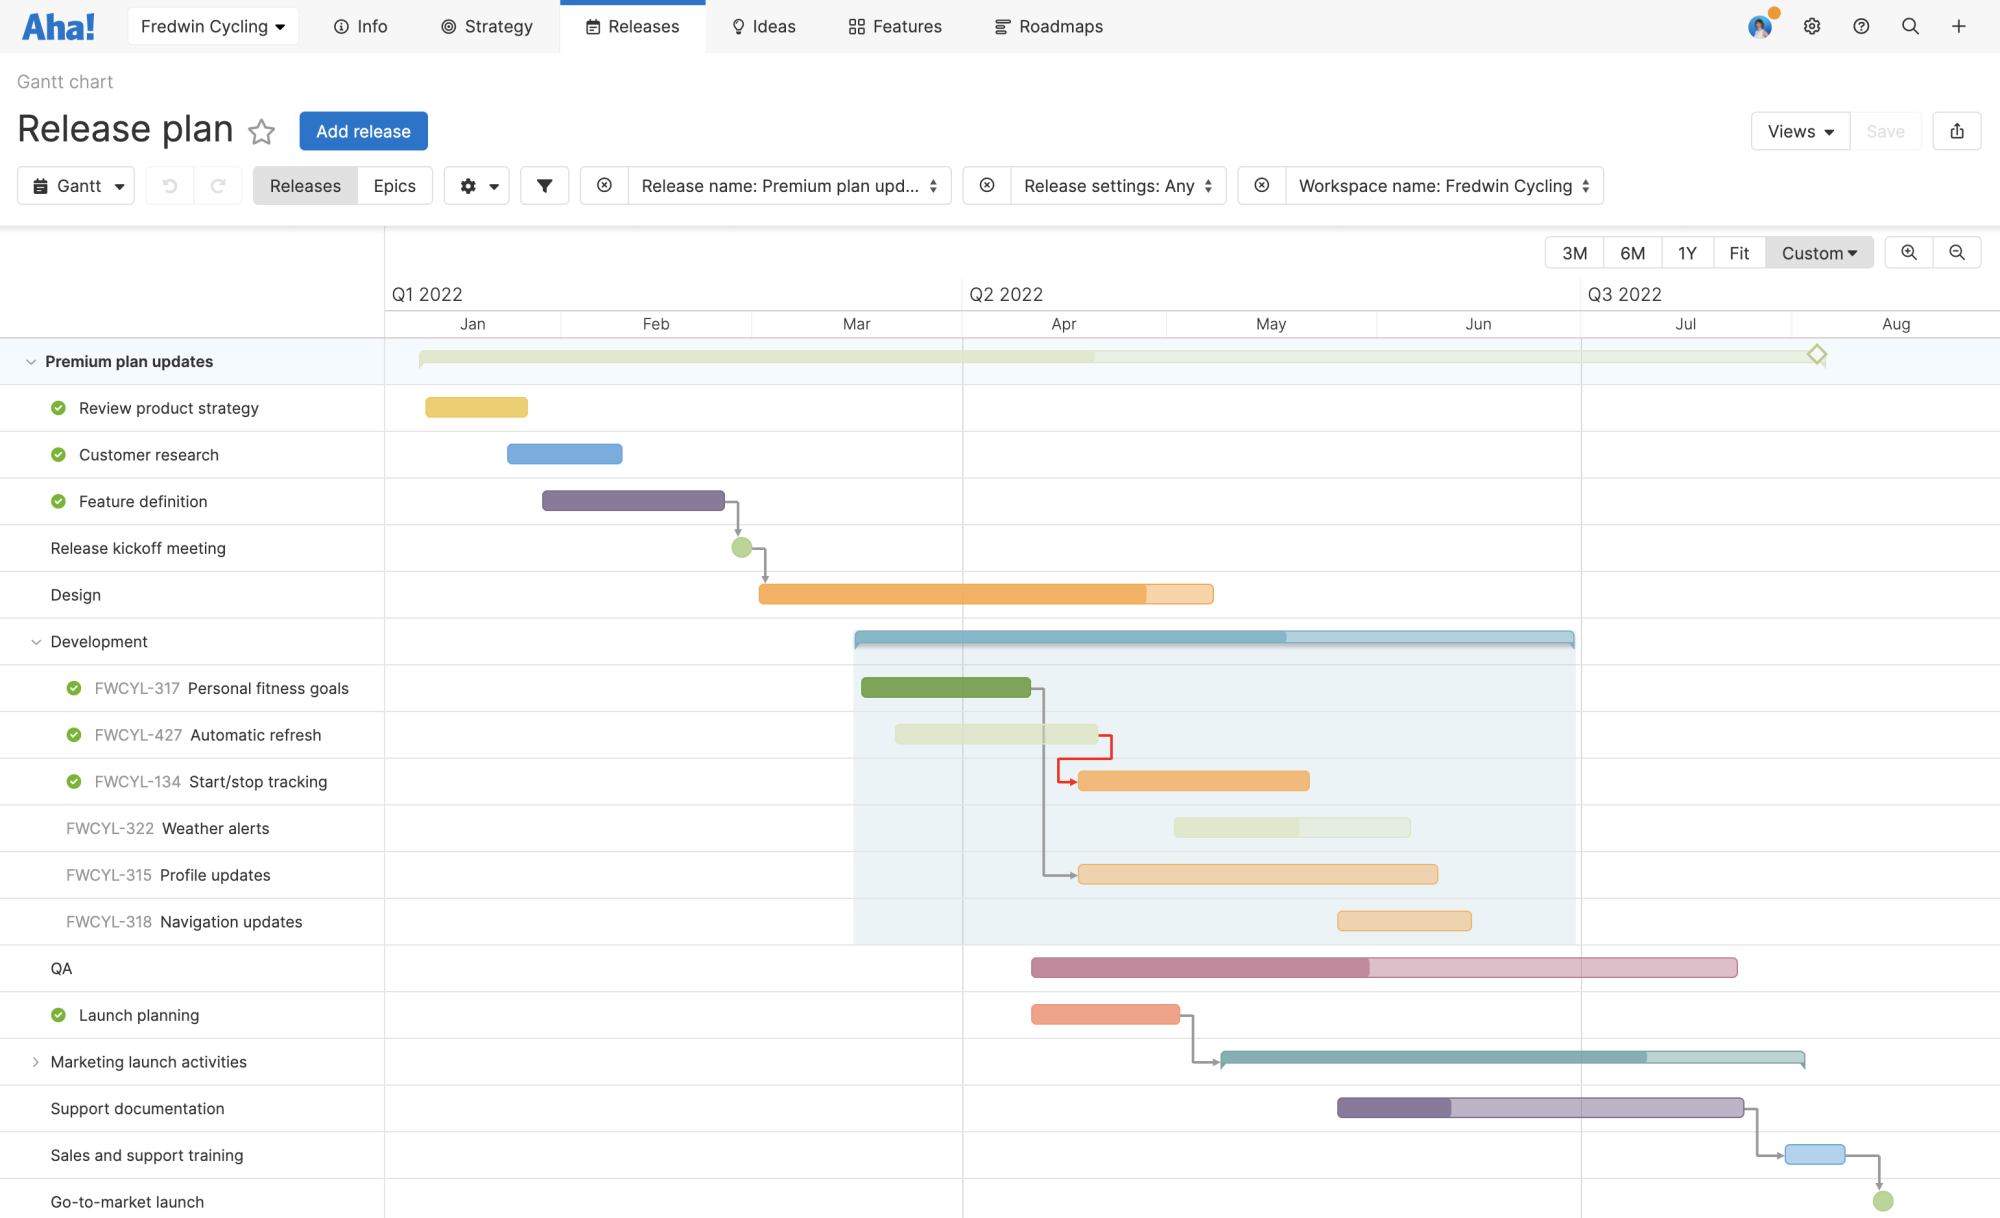 Here is a Gantt chart created in Aha! Roadmaps. The timeline at the top is broken into months and quarters, and the horizontal bars show the phases of work that different teams are responsible for.